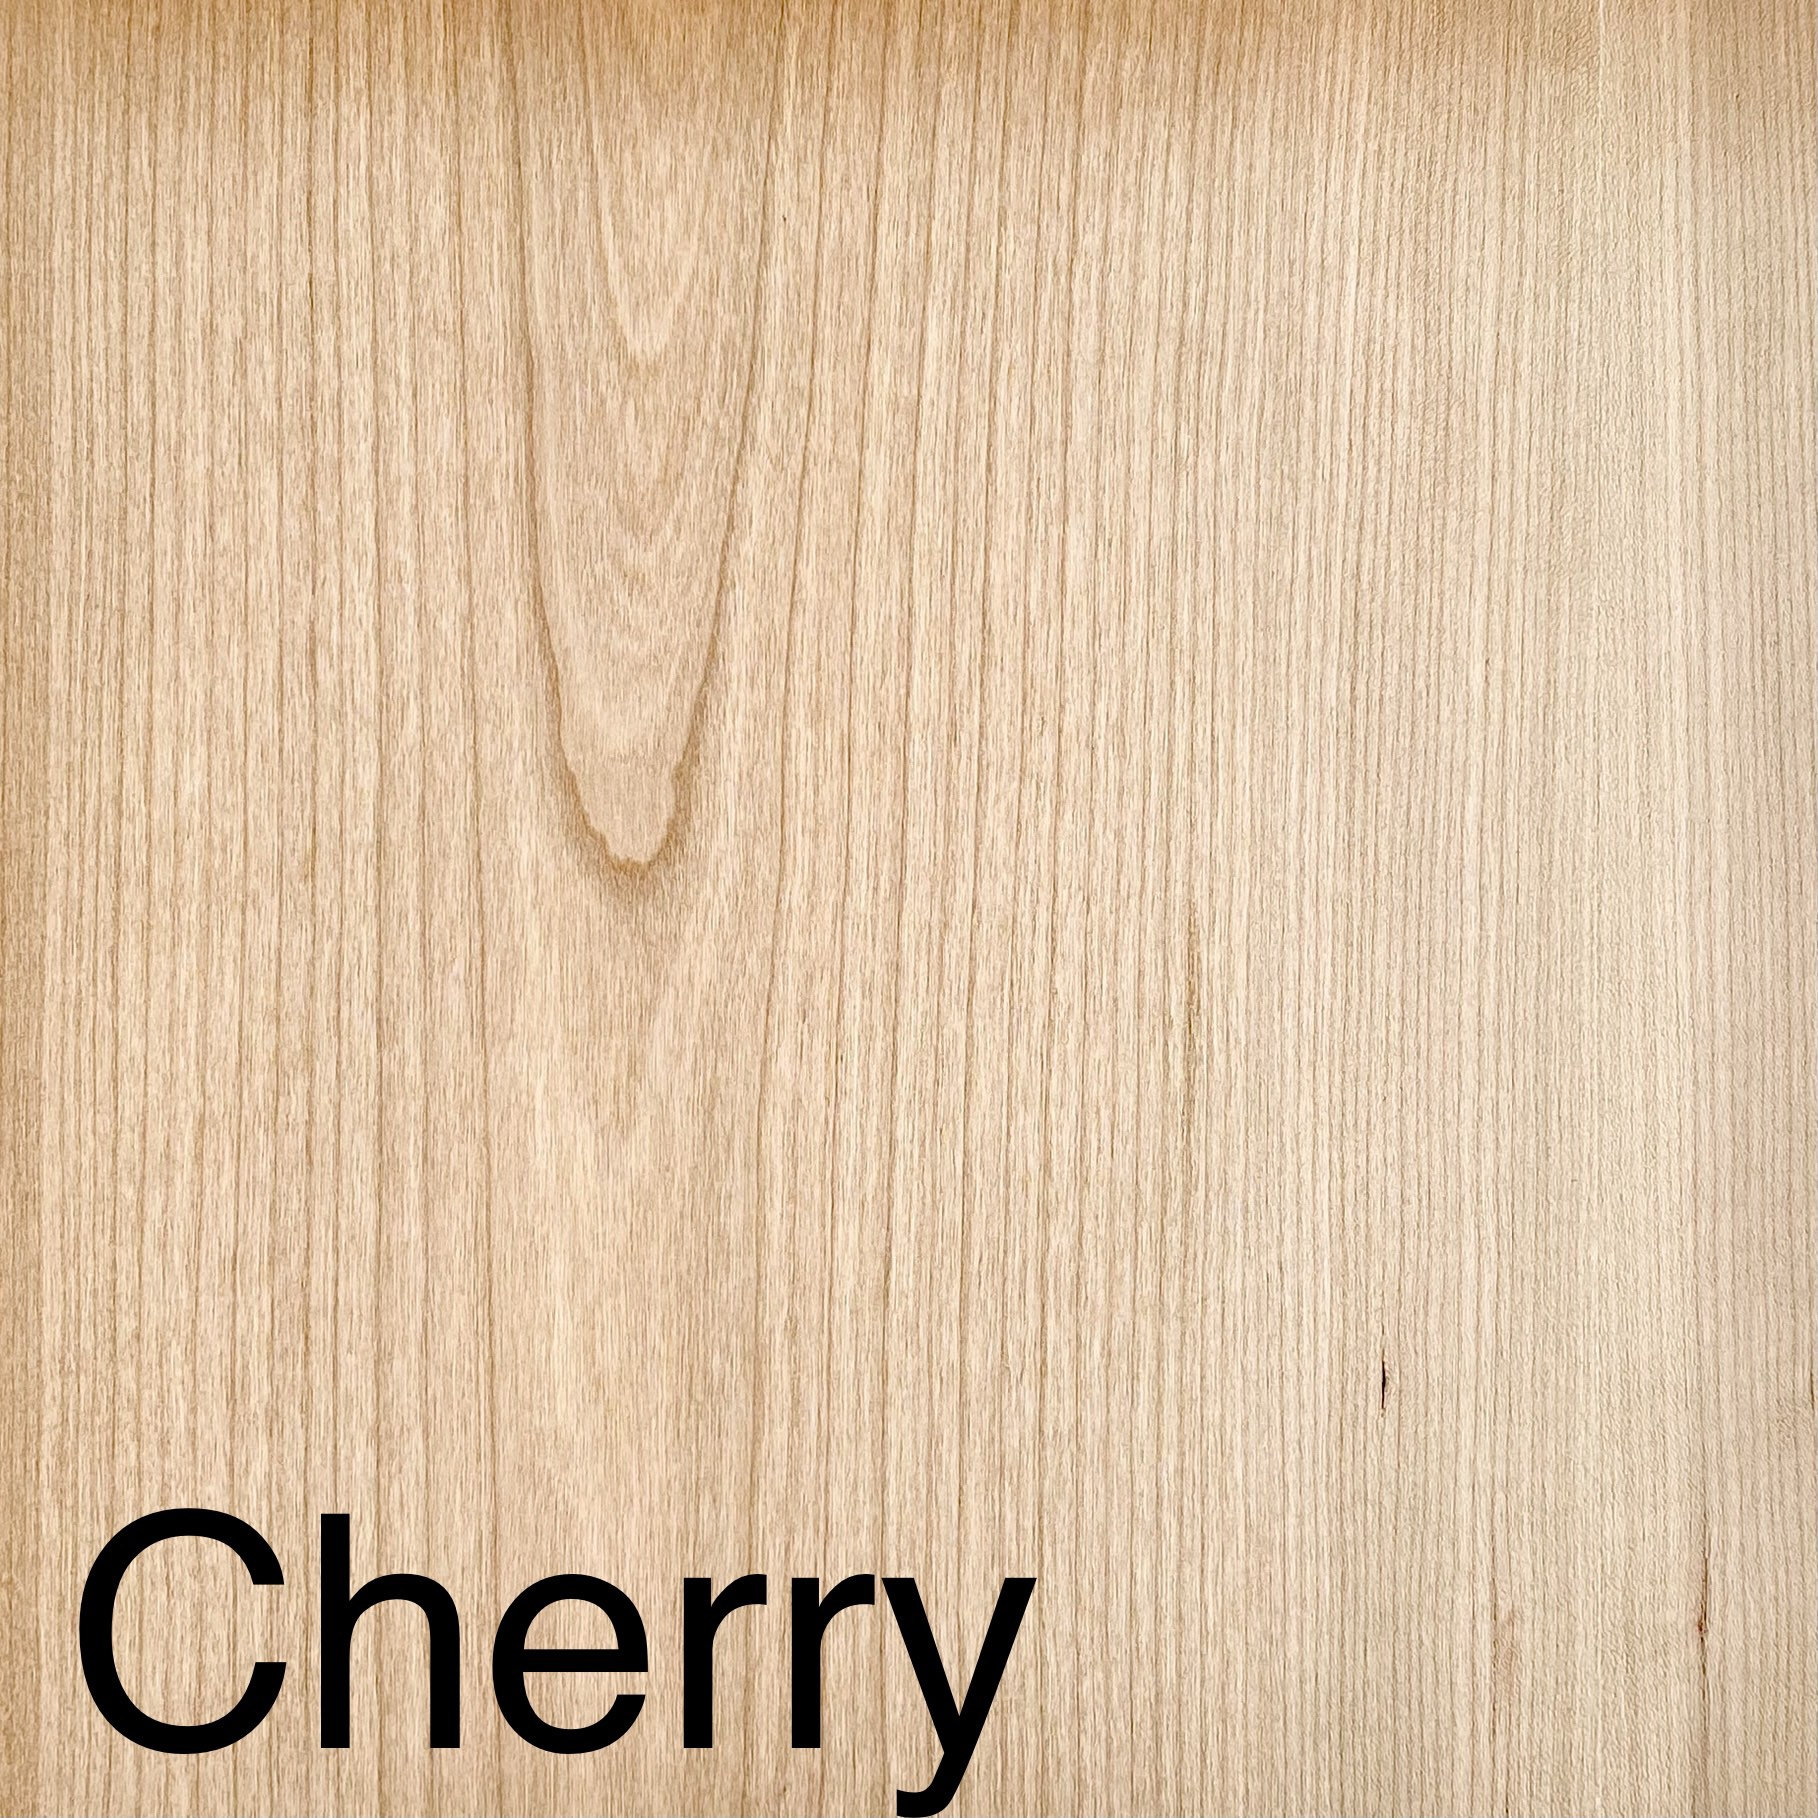 Cricut Natural Wood Veneers Bundle, Cherry and Walnut, 12x12 for Crafts  Mini Doll House Building Models School Art Ornament Projects Engraving